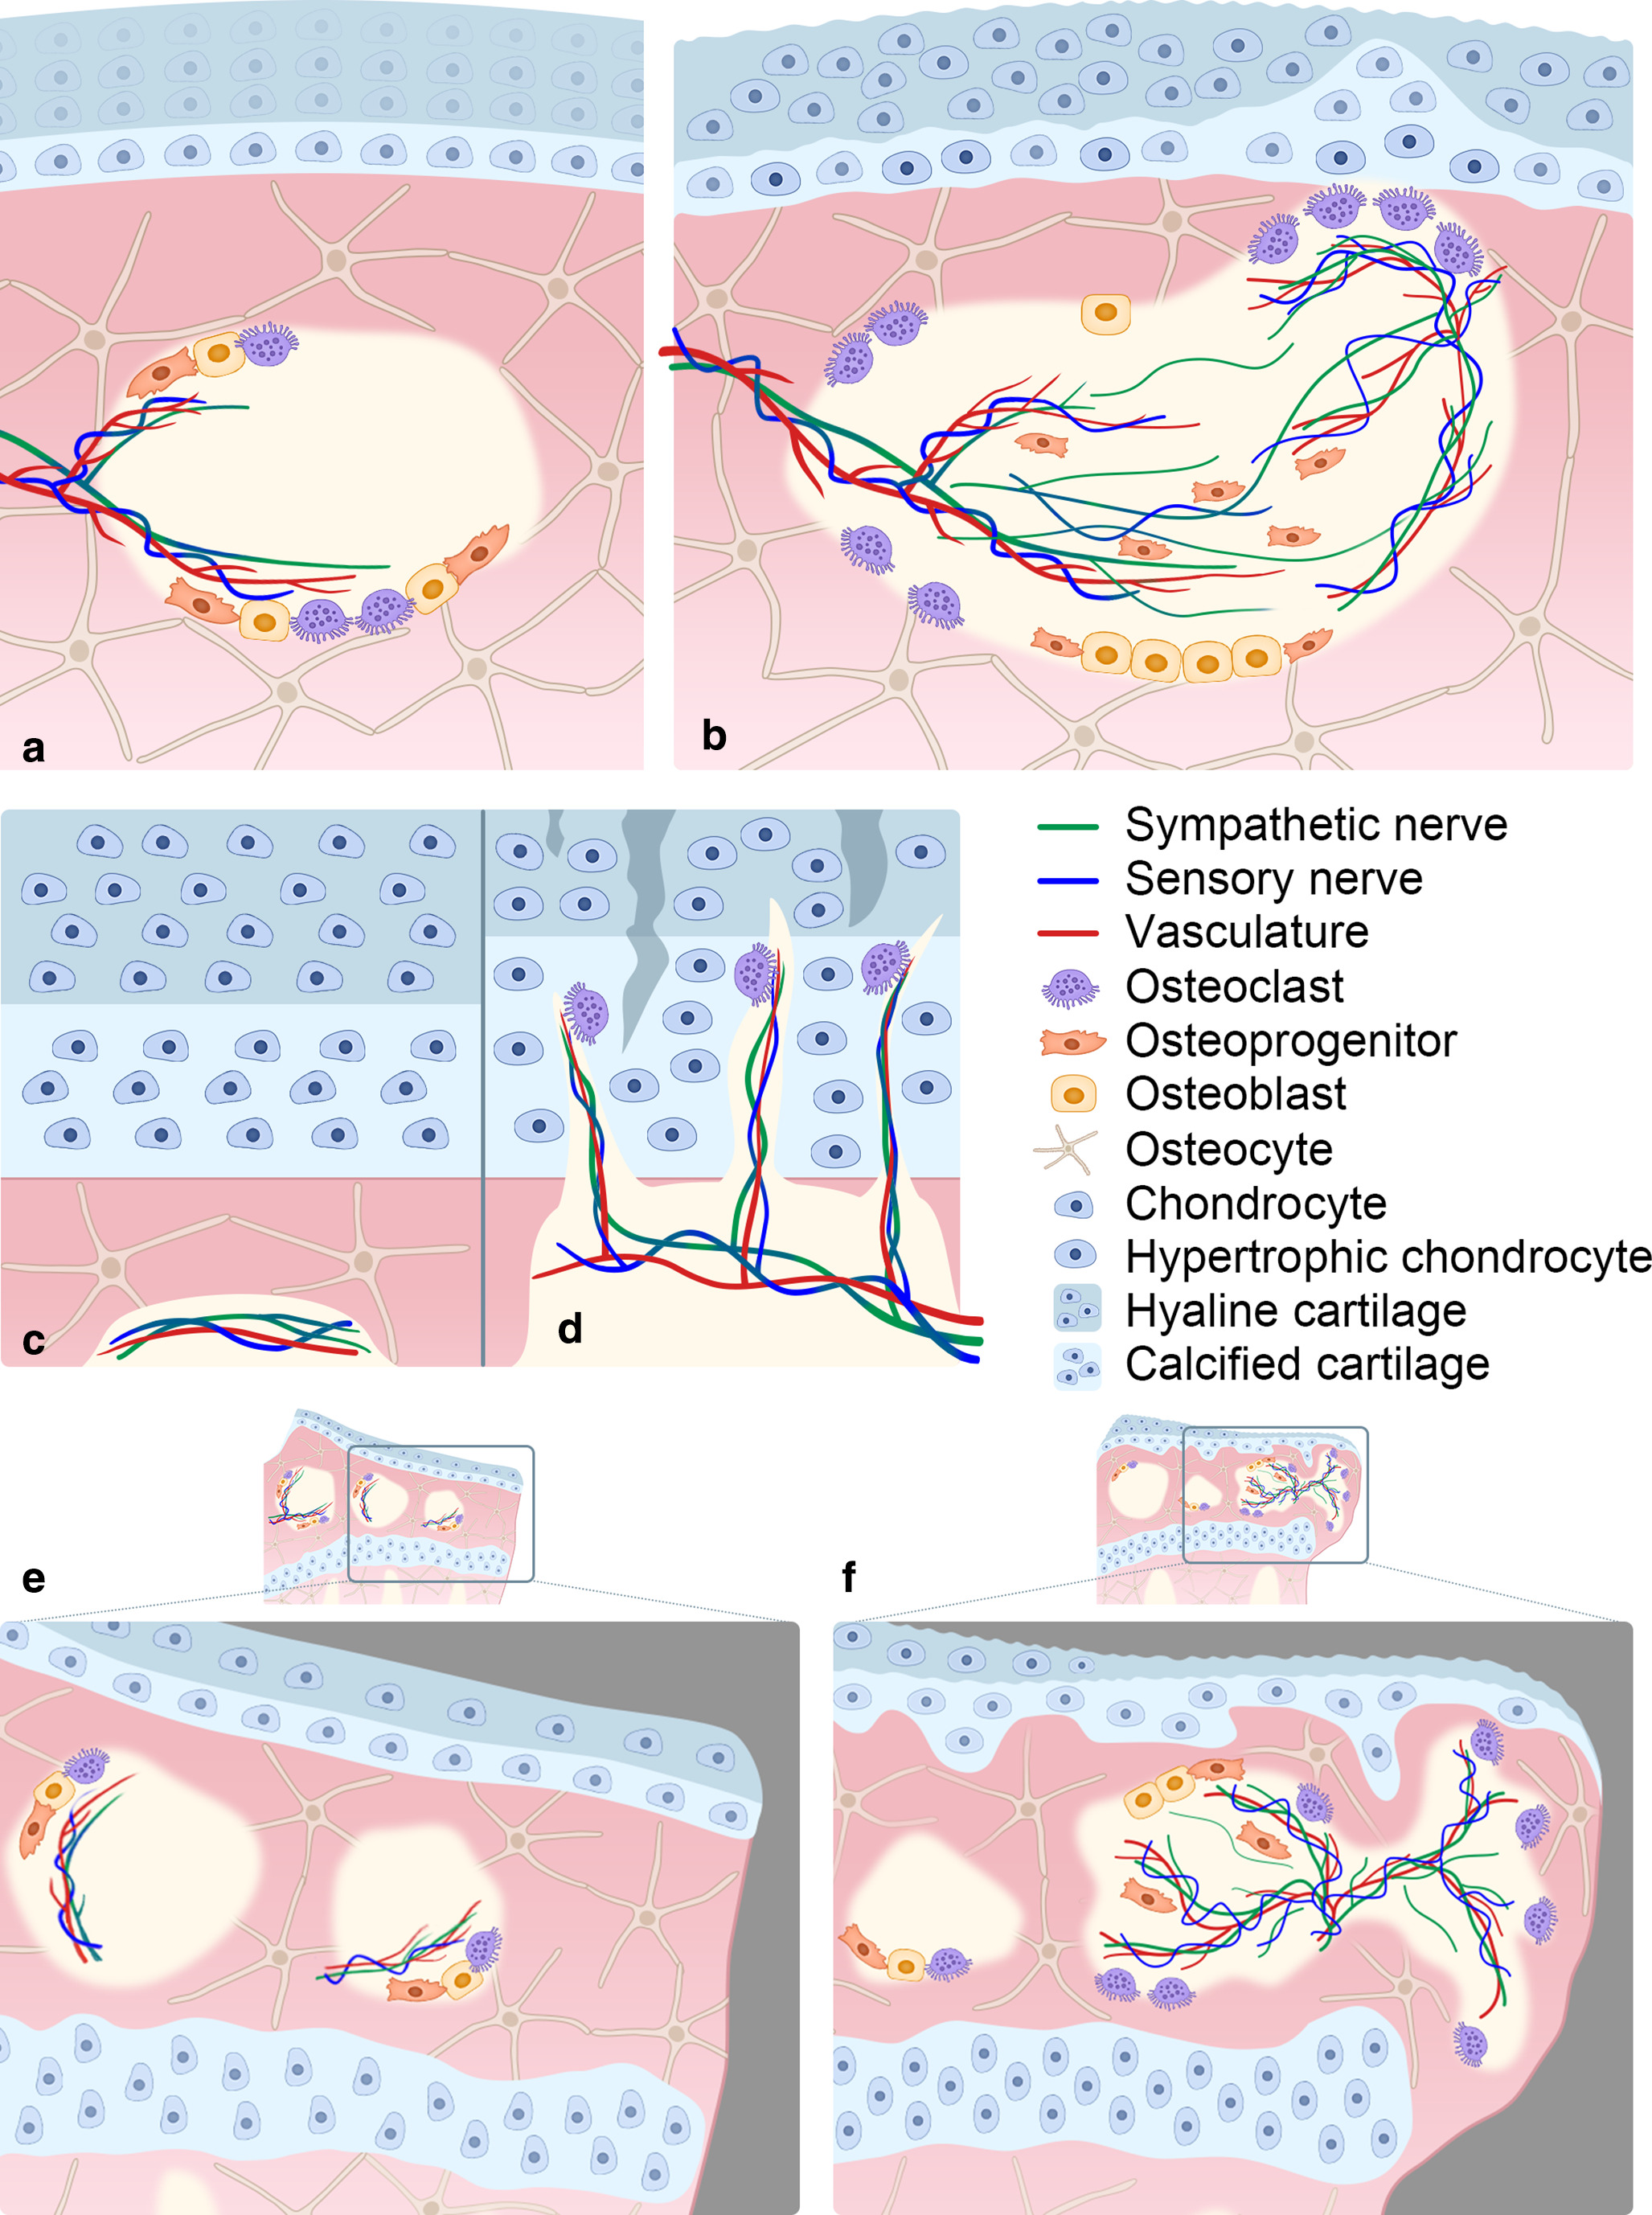 Fig. 2 
            The physiological and pathological distribution of peripheral innervation in the subchondral bone. a) and b) Schematic distribution and patterning of peripheral nerves in a) normal subchondral bone and b) osteoarthritis (OA) subchondral bone. Sensory and sympathetic nerves with vasculature present a fine branching in the subchondral bone. Both mainly locate near subchondral bone surfaces and near the bone cells, such as osteoblasts, osteoprogenitors, and osteoclasts. In OA, coupled with increased bone turnover and abnormal recruitment of osteoprogenitors, both sensory and sympathetic nerves showed aberrant and abnormal distribution, such as increased intensity and abnormal sprouting. c) and d) Peripheral innervation within osteochondral junction in c) normal and d) OA condition. Sensory nerves, sympathetic nerves, and vasculature remain in the subchondral bone without invasion into cartilage under normal conditions. In OA, the sensory and sympathetic nerves, coupled with vasculature enter calcified cartilage (CC) and even hyaline cartilage from aberrant subchondral bone through the osteochondral channels that may be induced by overactive osteoclast activity. e) and f) Peripheral innervation in e) normal subchondral bone and f) osteophytes. Sensory and sympathetic nerves with vasculature present a fine branching in the normal subchondral bone. In OA, the sensory and sympathetic nerves, accompanied by vasculature, enter into osteophytes from aberrant subchondral bone, coupled with overactive osteoclast activity.
          